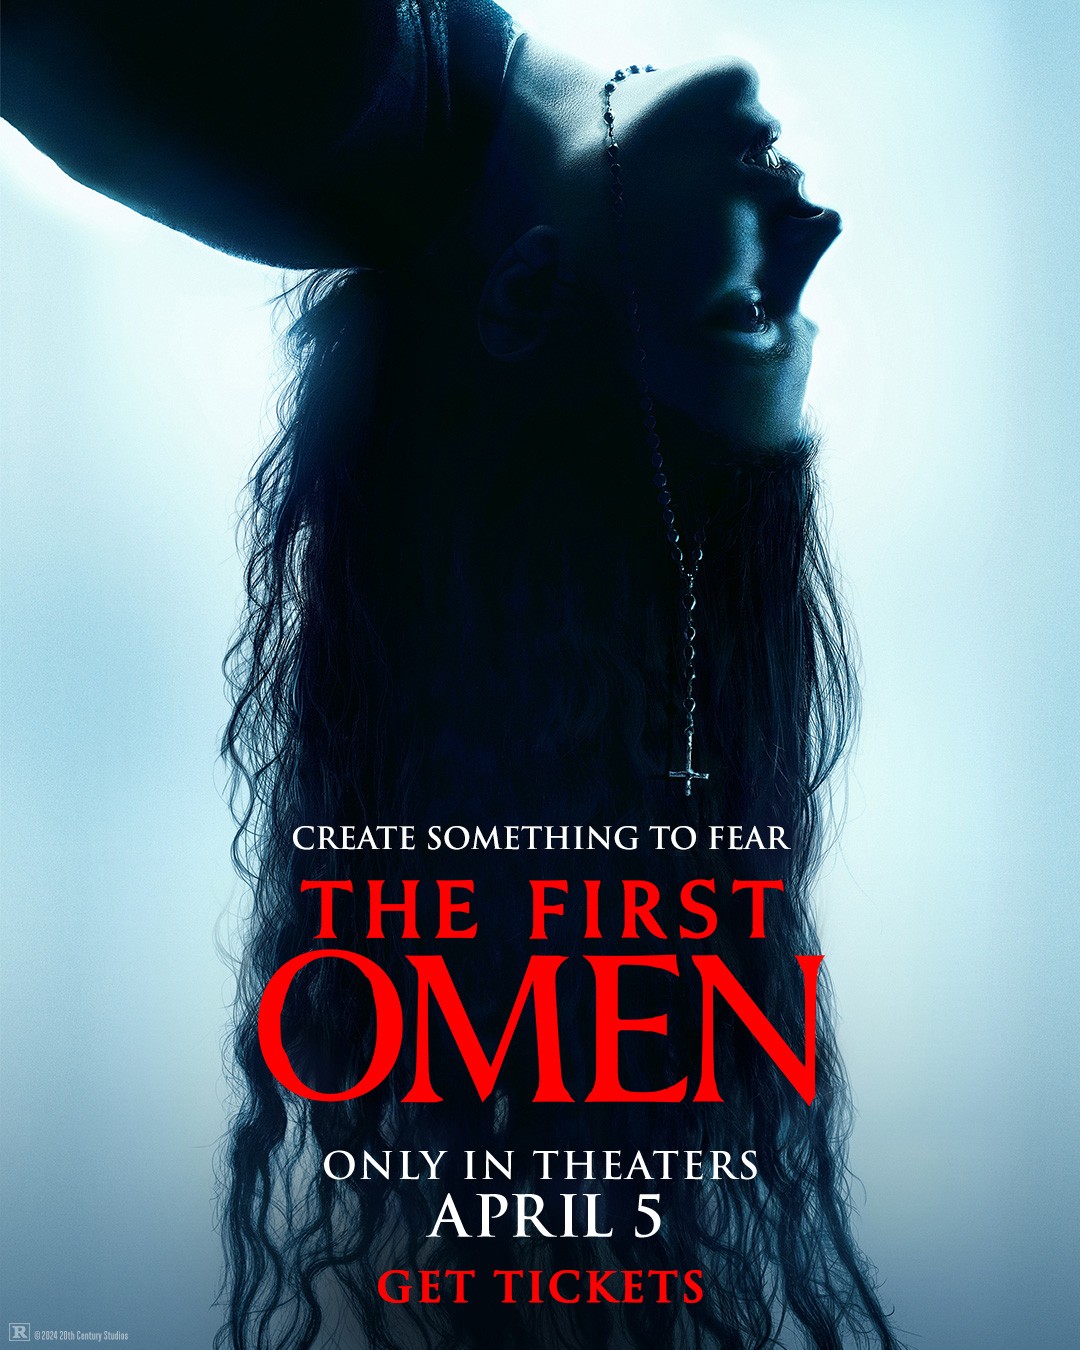 The First Omen | Rotten Tomatoes